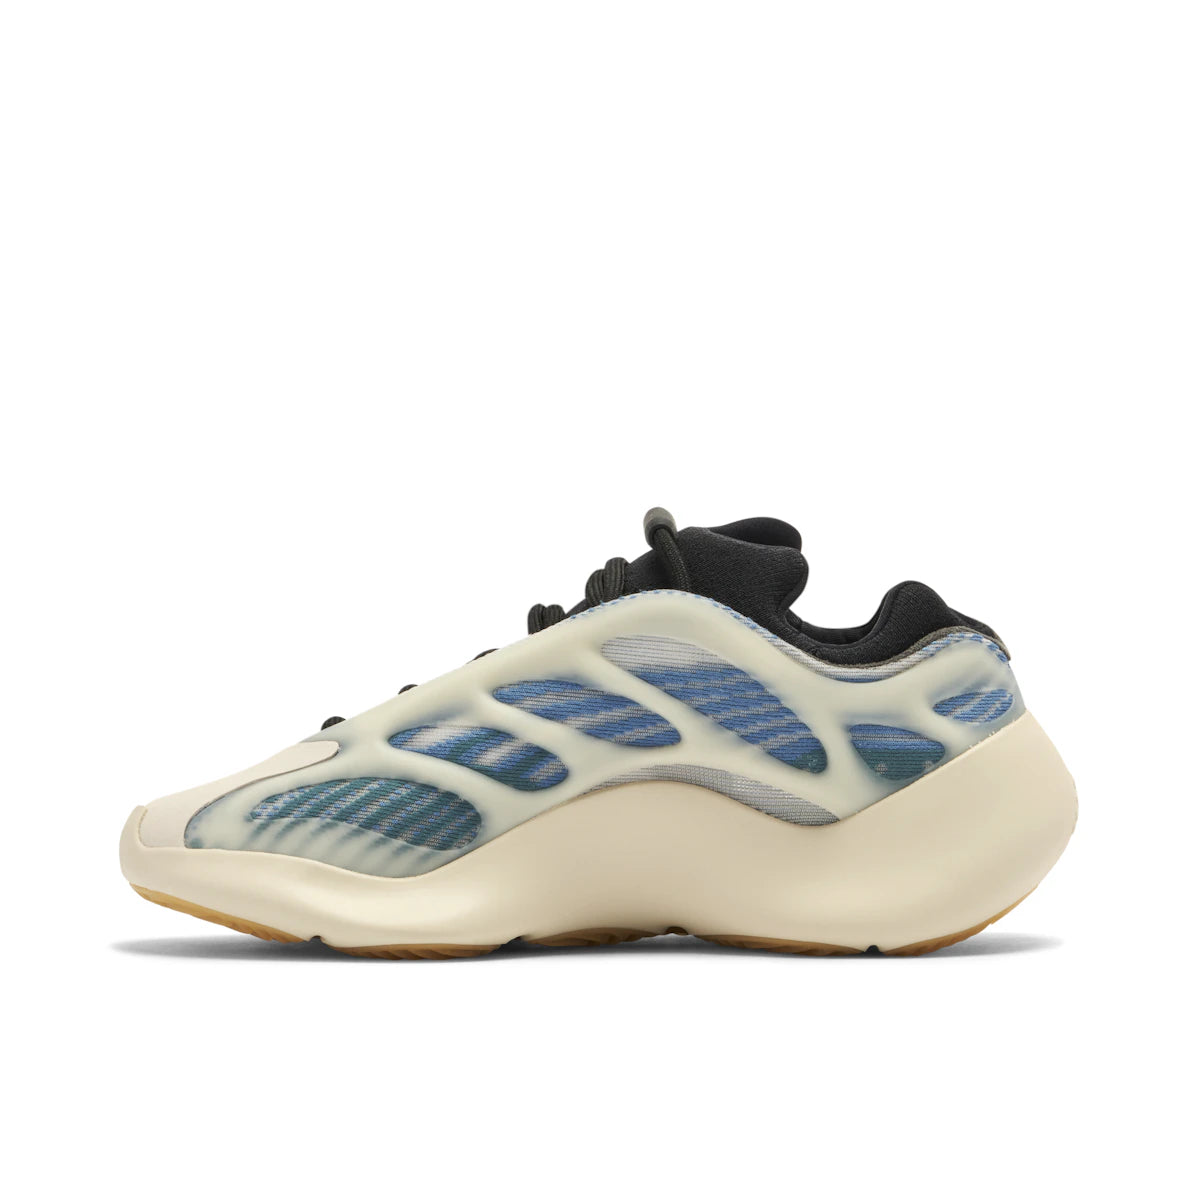 adidas Yeezy 700 V3 Kyanite by Yeezy from £250.00